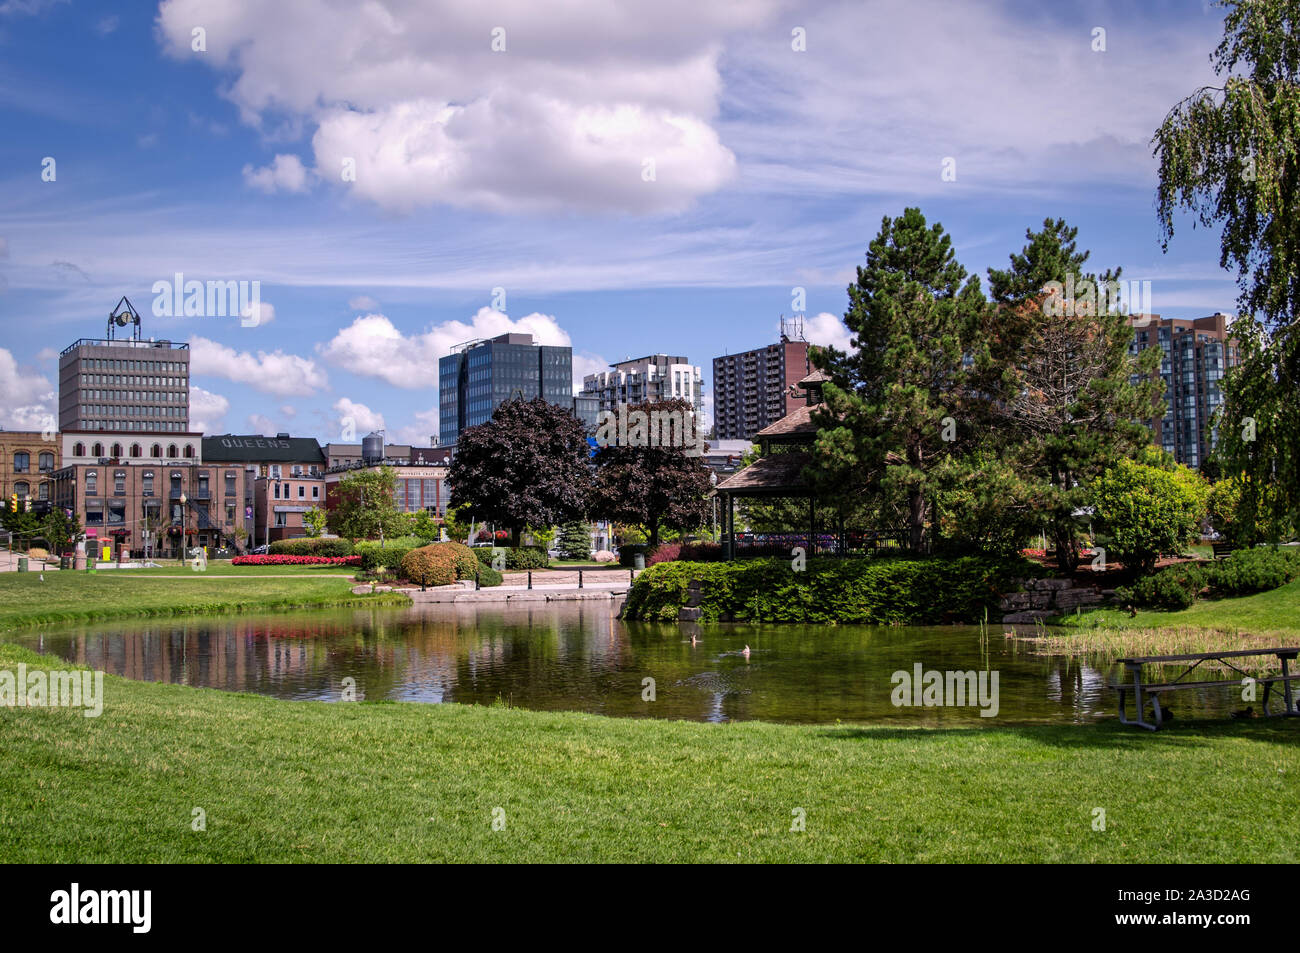 Barrie, Ontario, Canada - 2019 08 25: Summer view on the pond in the Heritage Park in Downtown Barrie, Ontario, Canada. Stock Photo